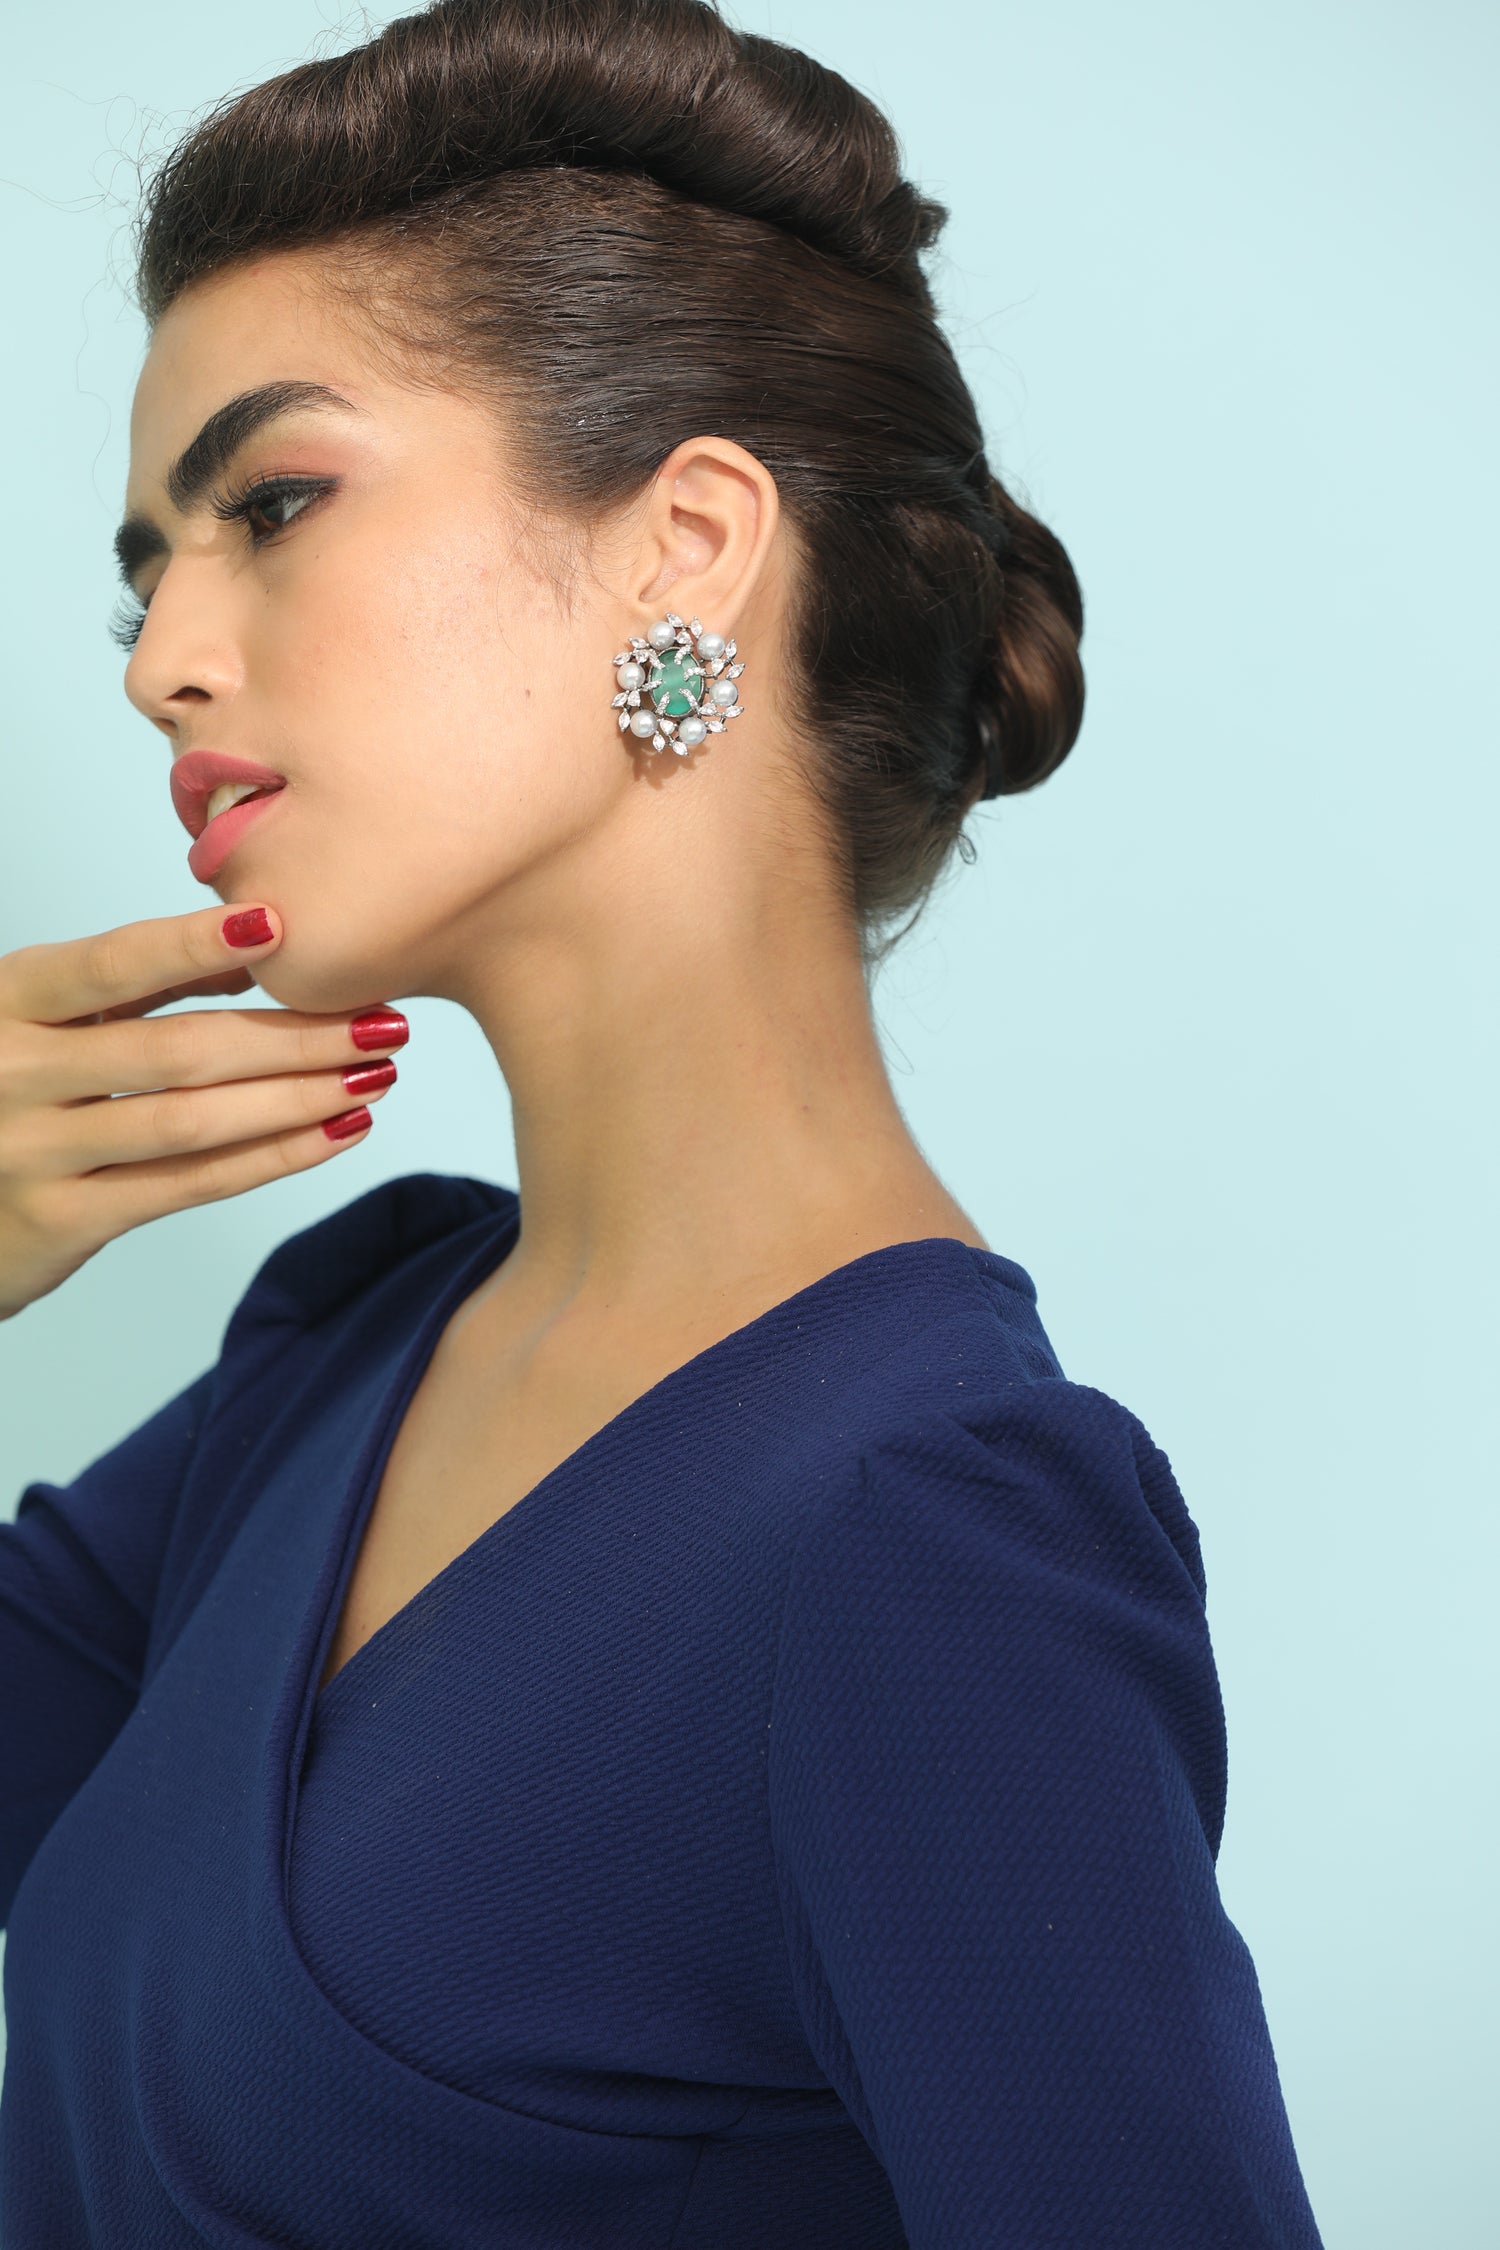 Everyday Elegance: Complete your look with these classic emerald earrings, suitable for all occasions." "Sophisticated Emerald Studs: Stand out with these minimalist emerald earrings, a must-have accessory